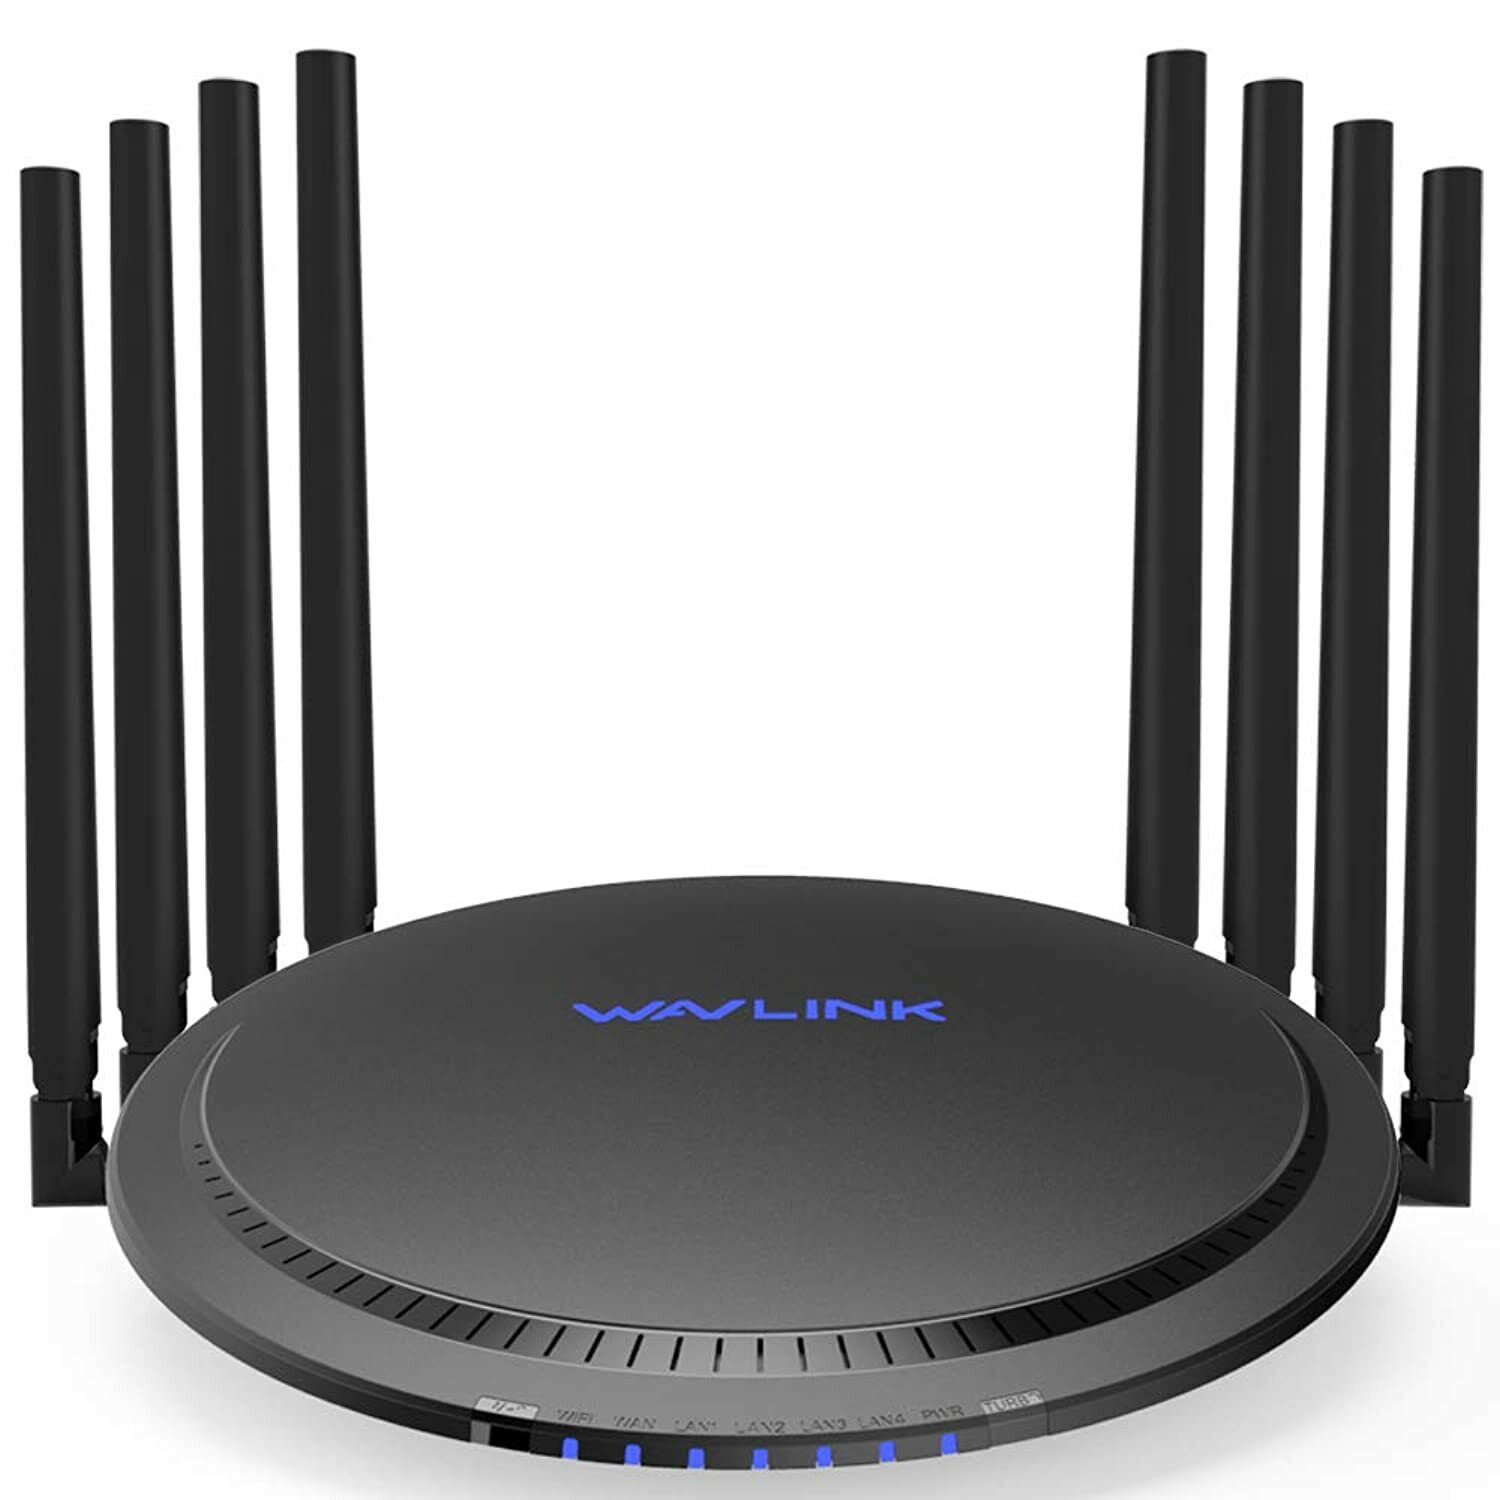 New Wavlink Ac3000 Smart Wi-Fi Router For Home,Mu-Mimo Tri-Band Wireless I